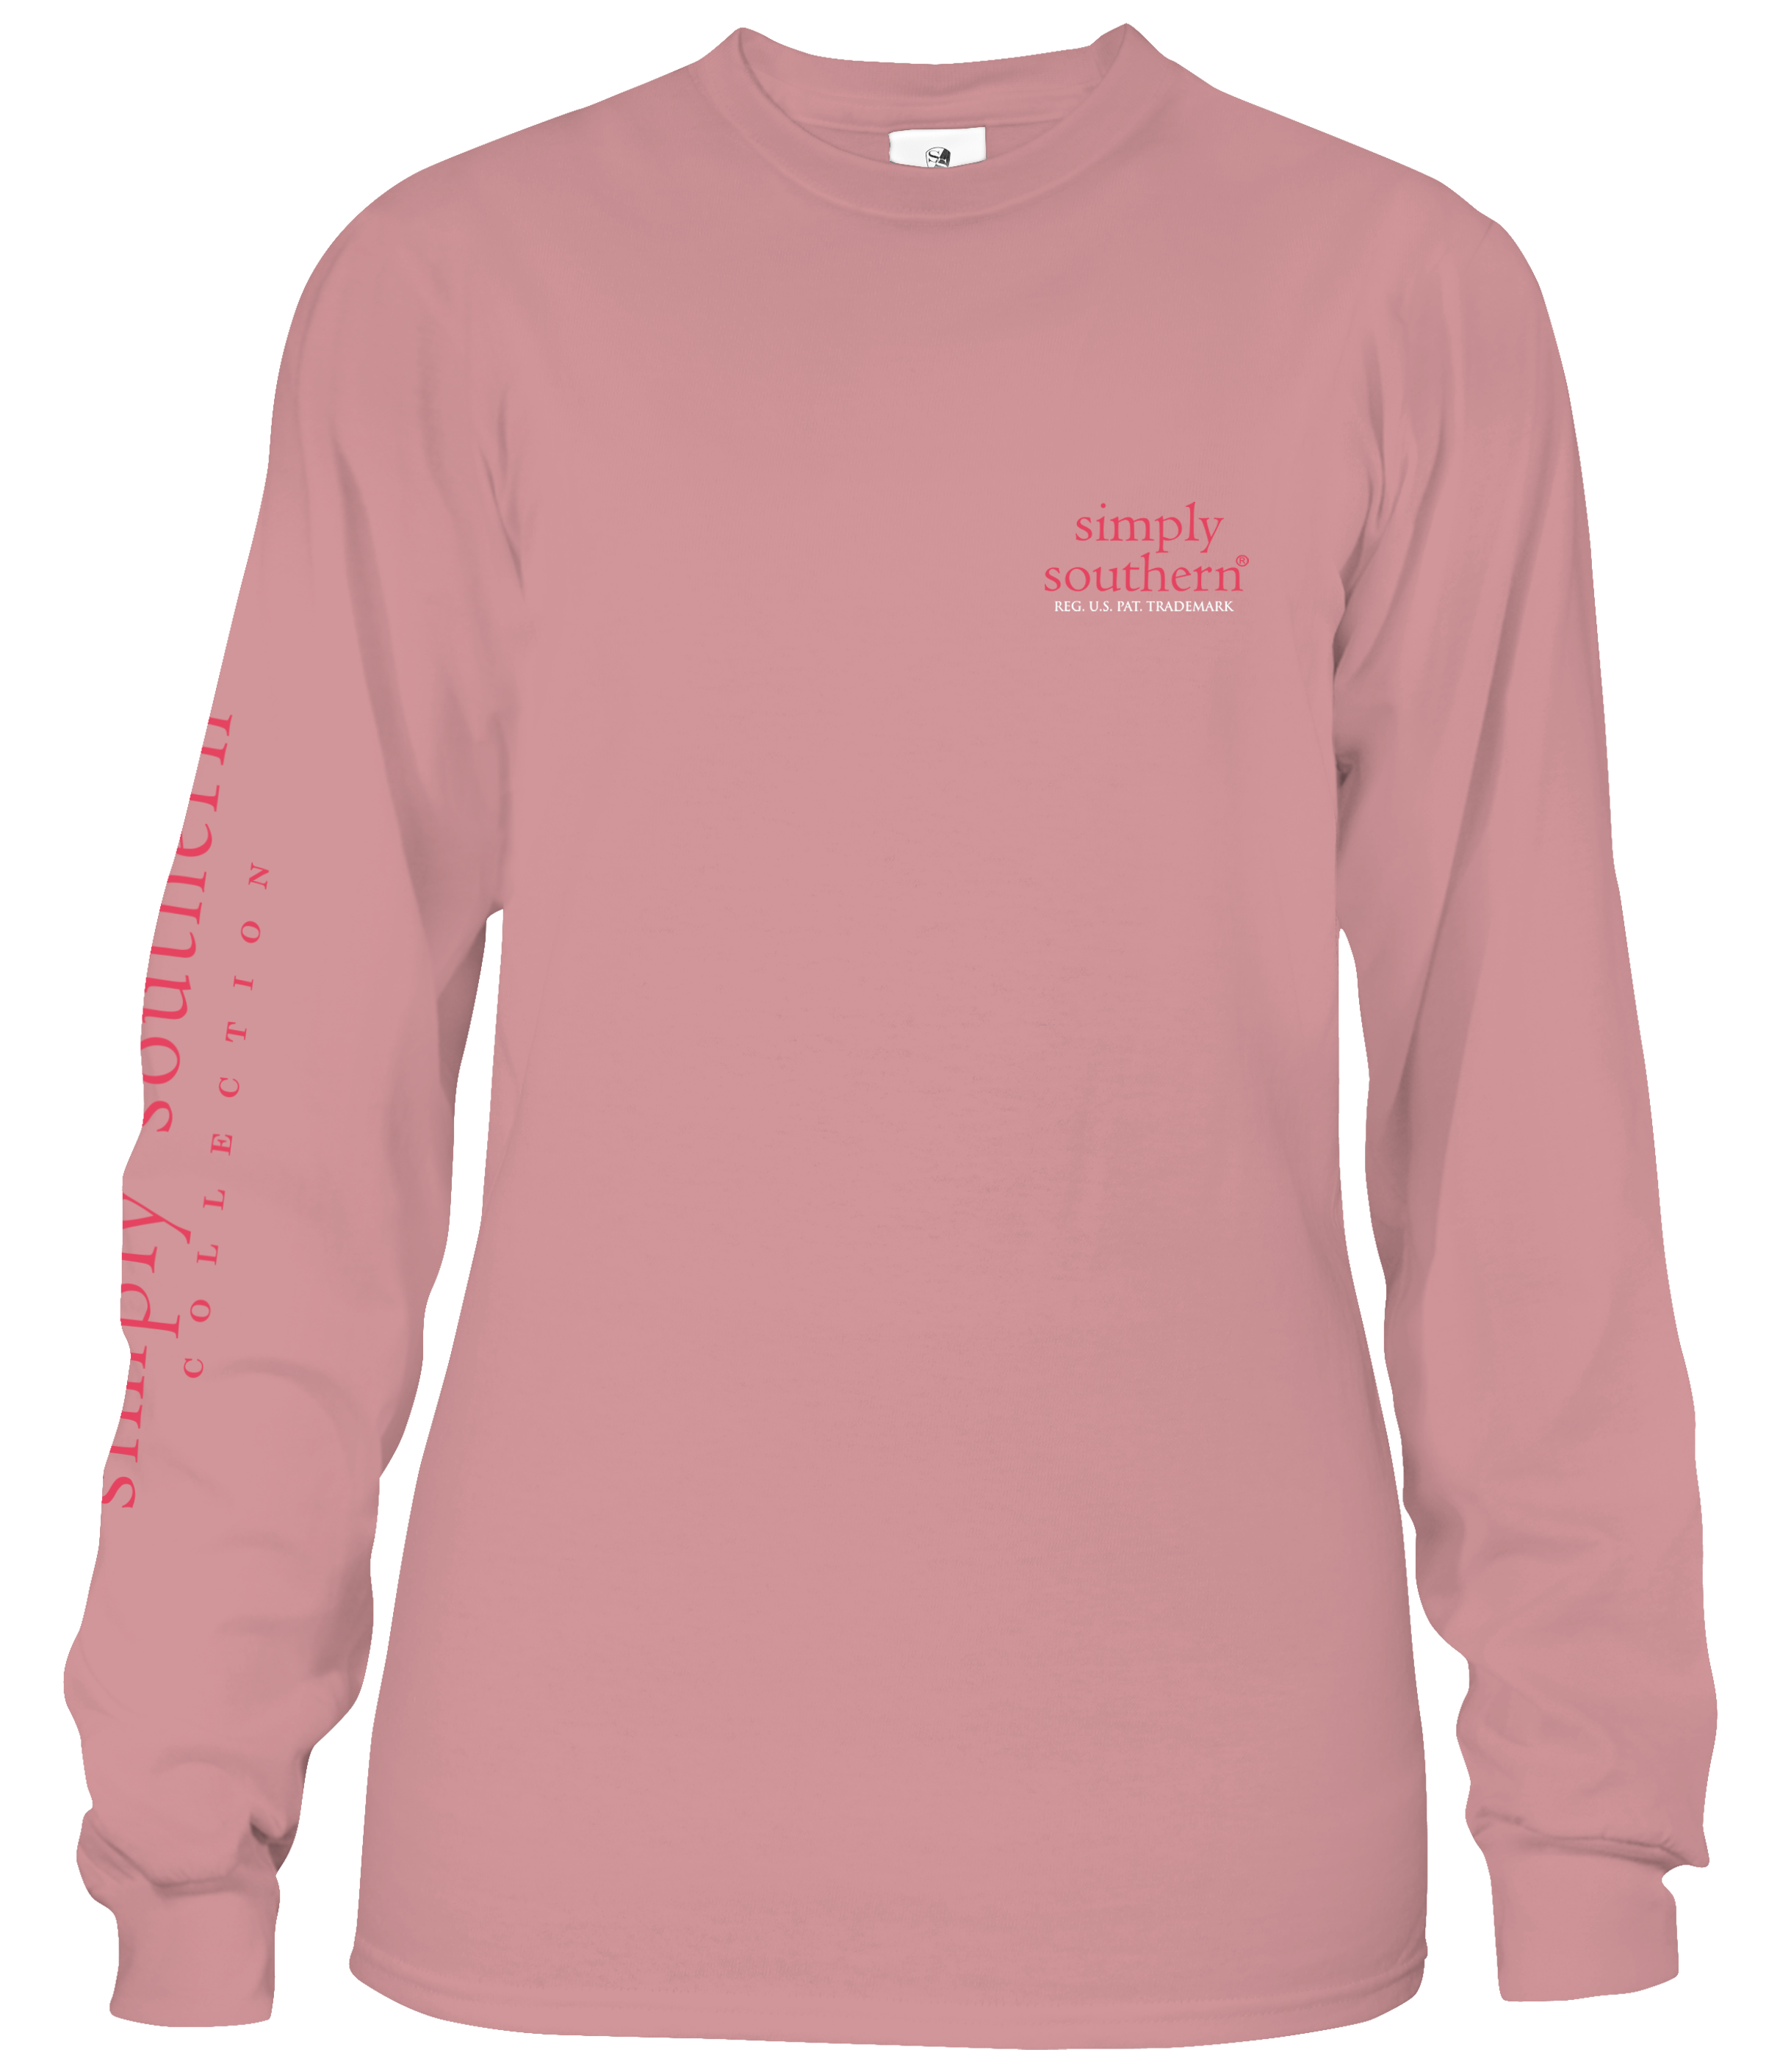 ‘Nothing Tacos Can’t Fix’ Long Sleeve Tee by Simply Southern